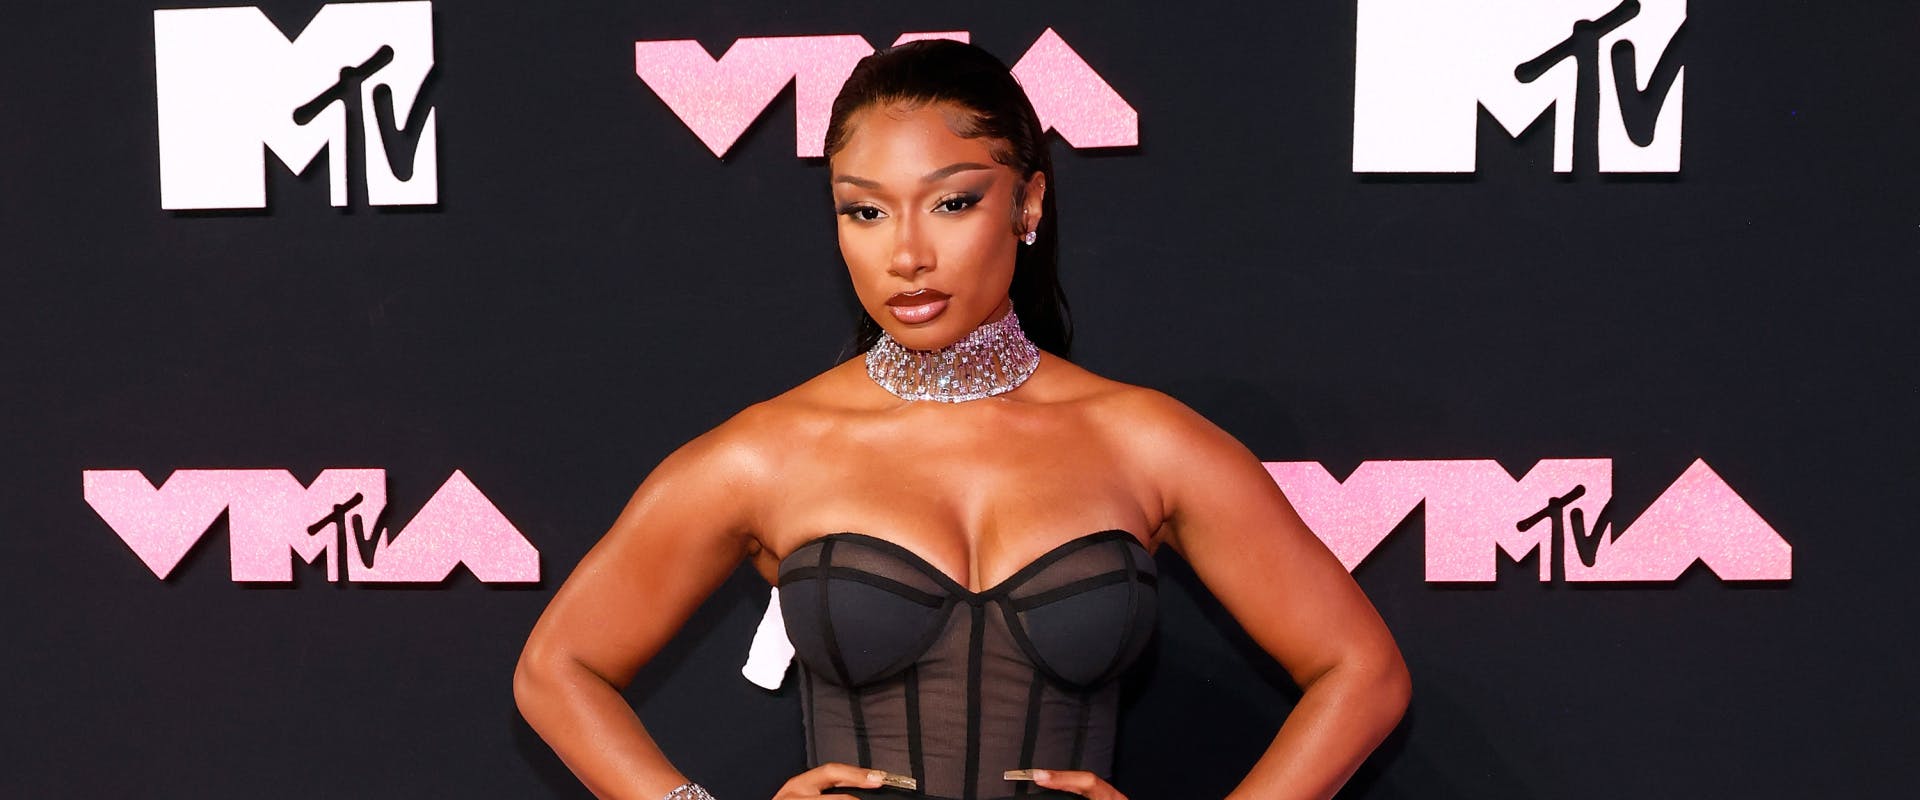 NEWARK, NEW JERSEY - SEPTEMBER 12: Megan Thee Stallion attends the 2023 MTV Video Music Awards at Prudential Center on September 12, 2023 in Newark, New Jersey. (Photo by Taylor Hill/Getty Images)